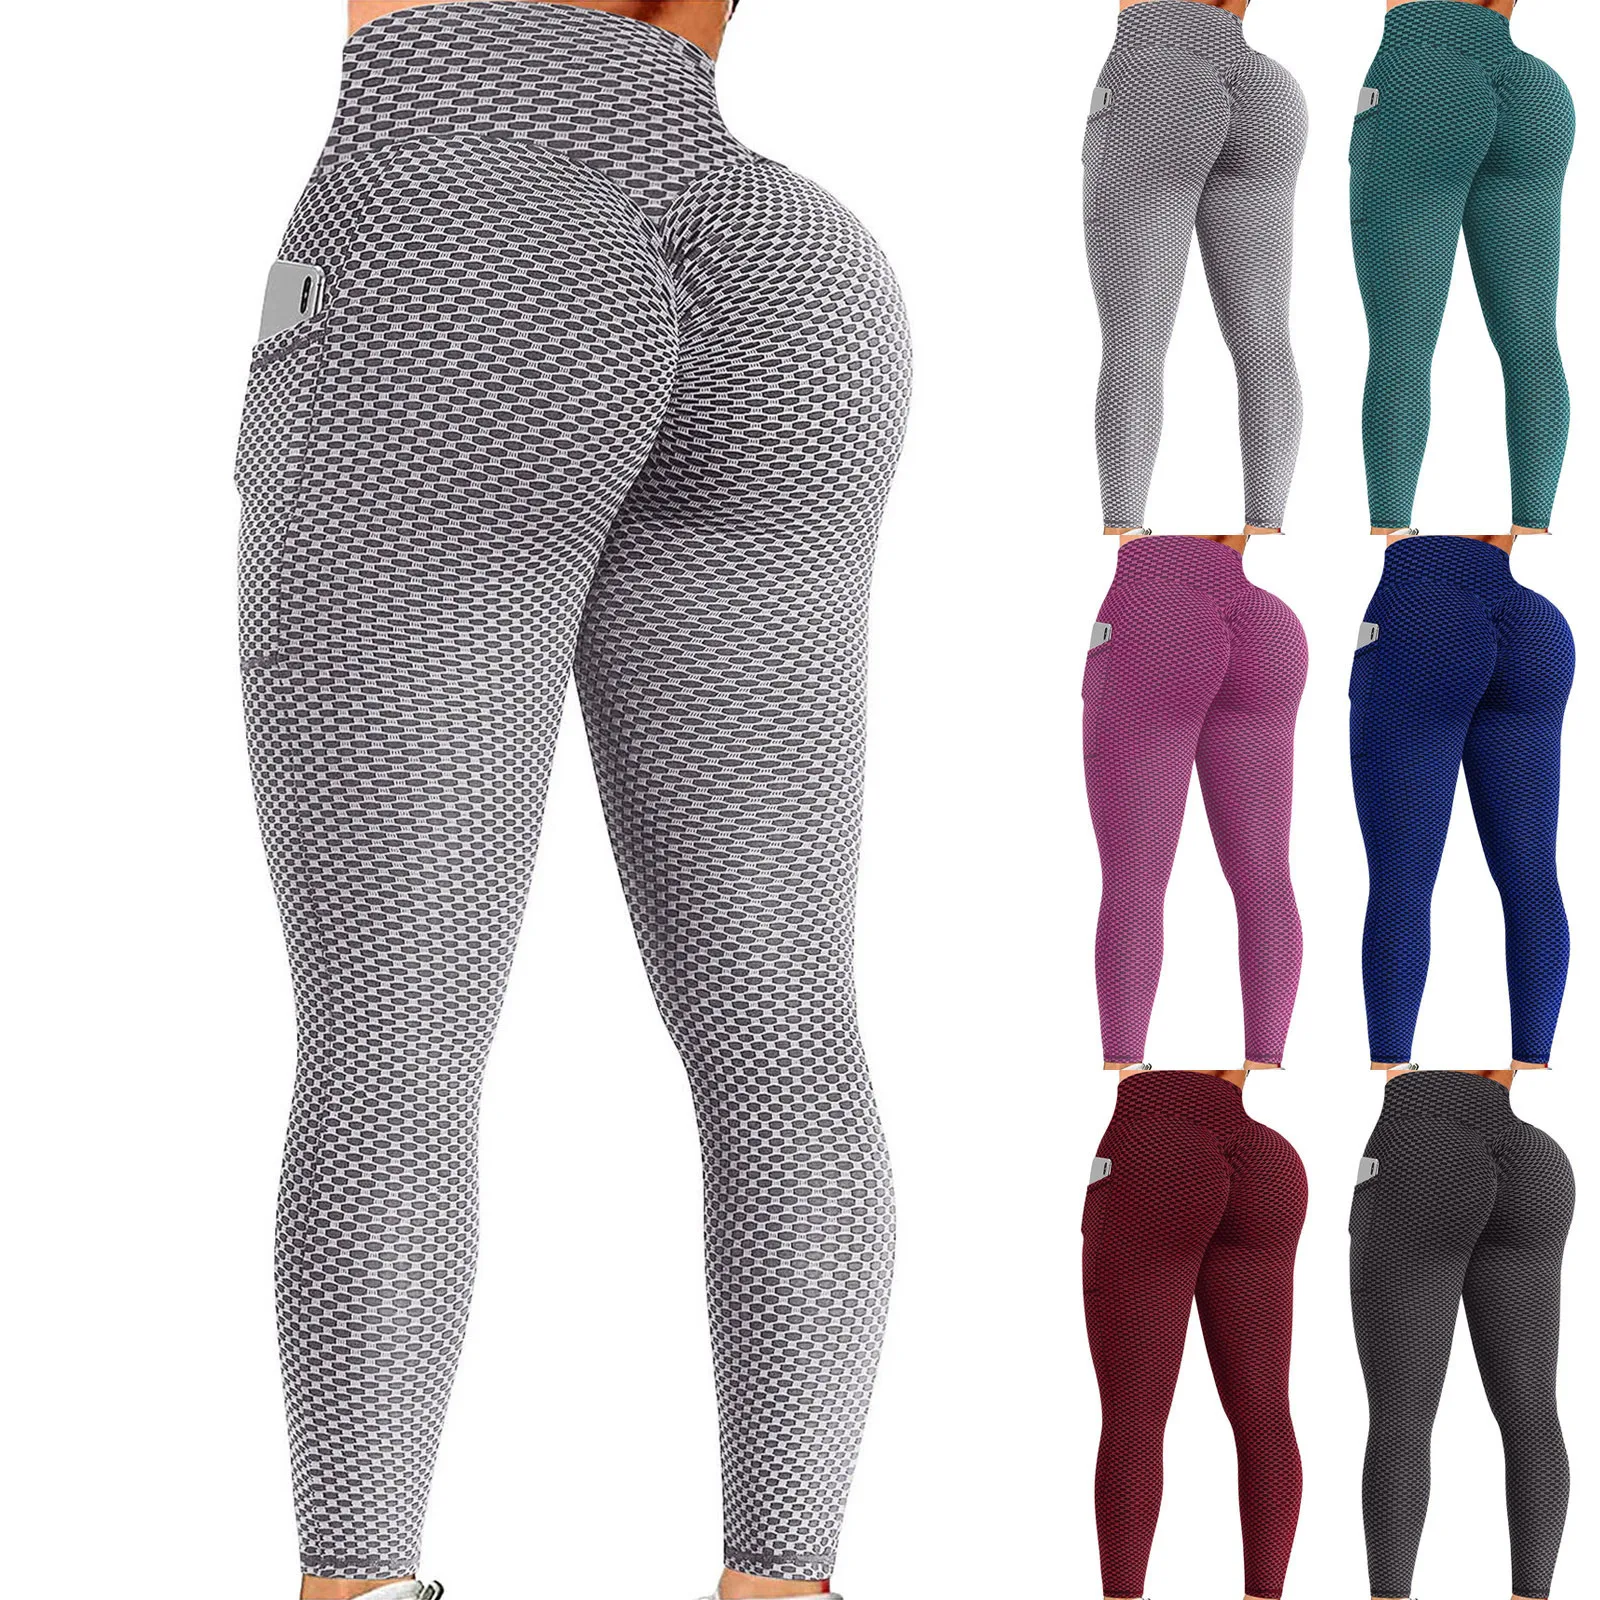 

Womens Stretch Sexy Yoga Leggings Fitness Running Gym Sport Tights Women Full Length Active Pants legging taille haute E2